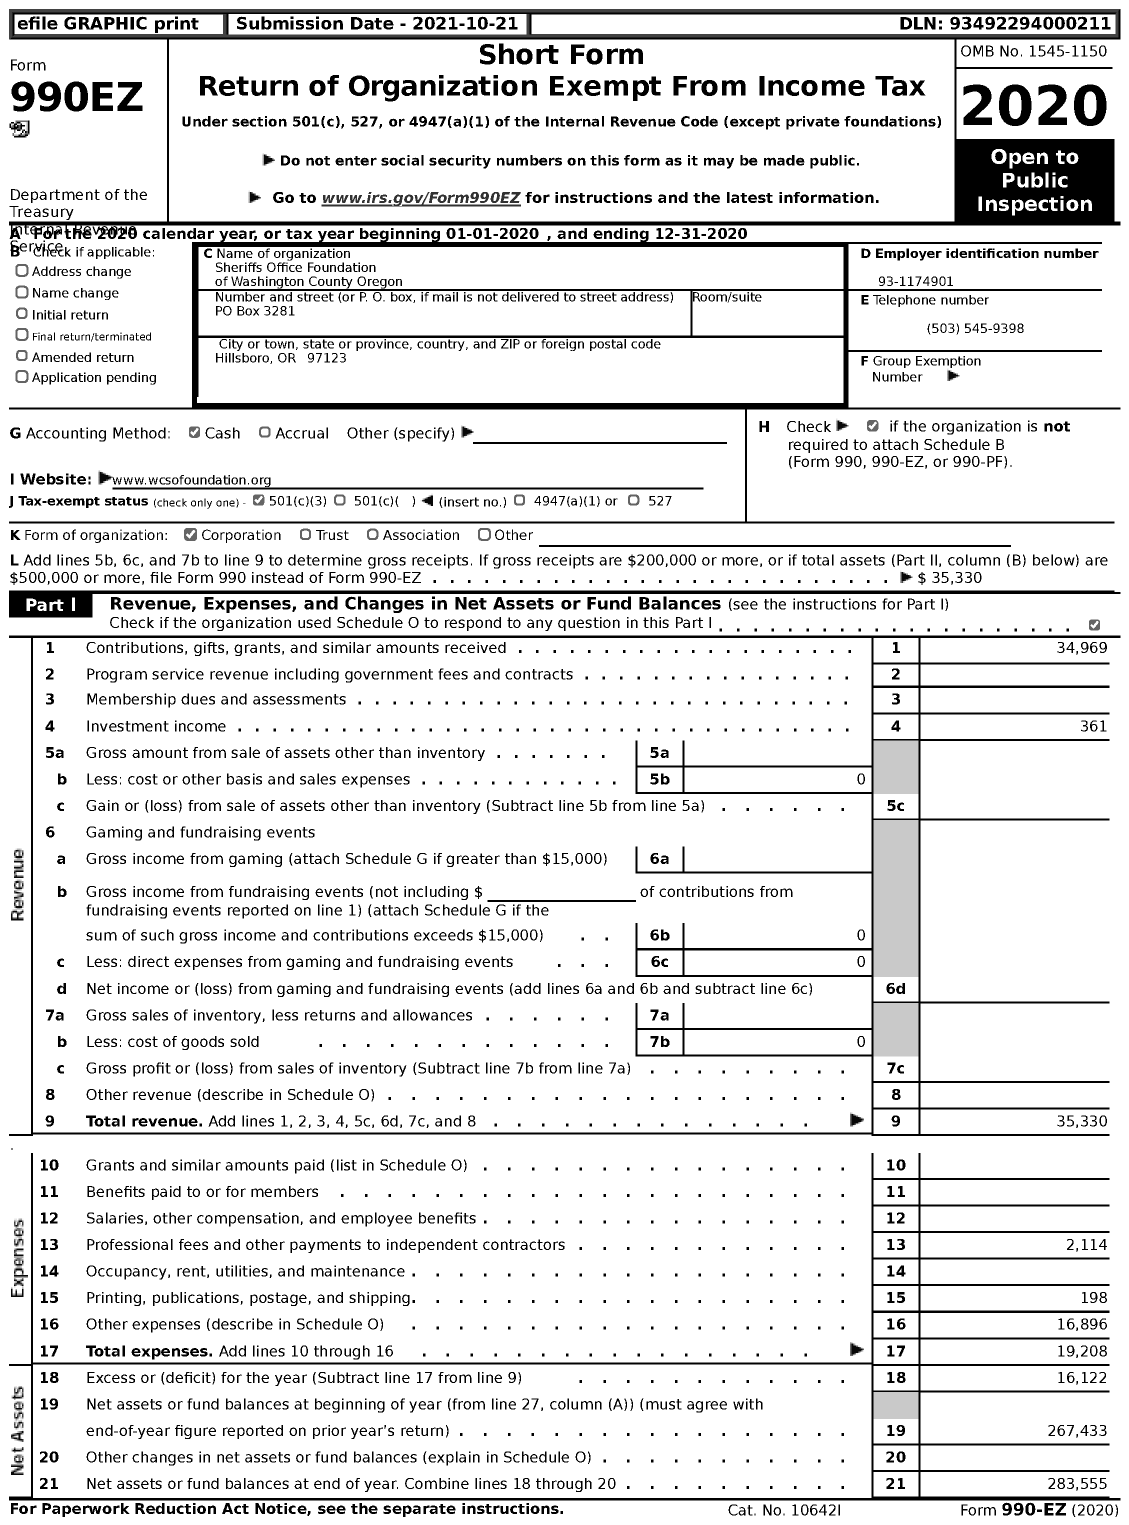 Image of first page of 2020 Form 990EZ for Sheriffs Office Foundation of Washington County Oregon